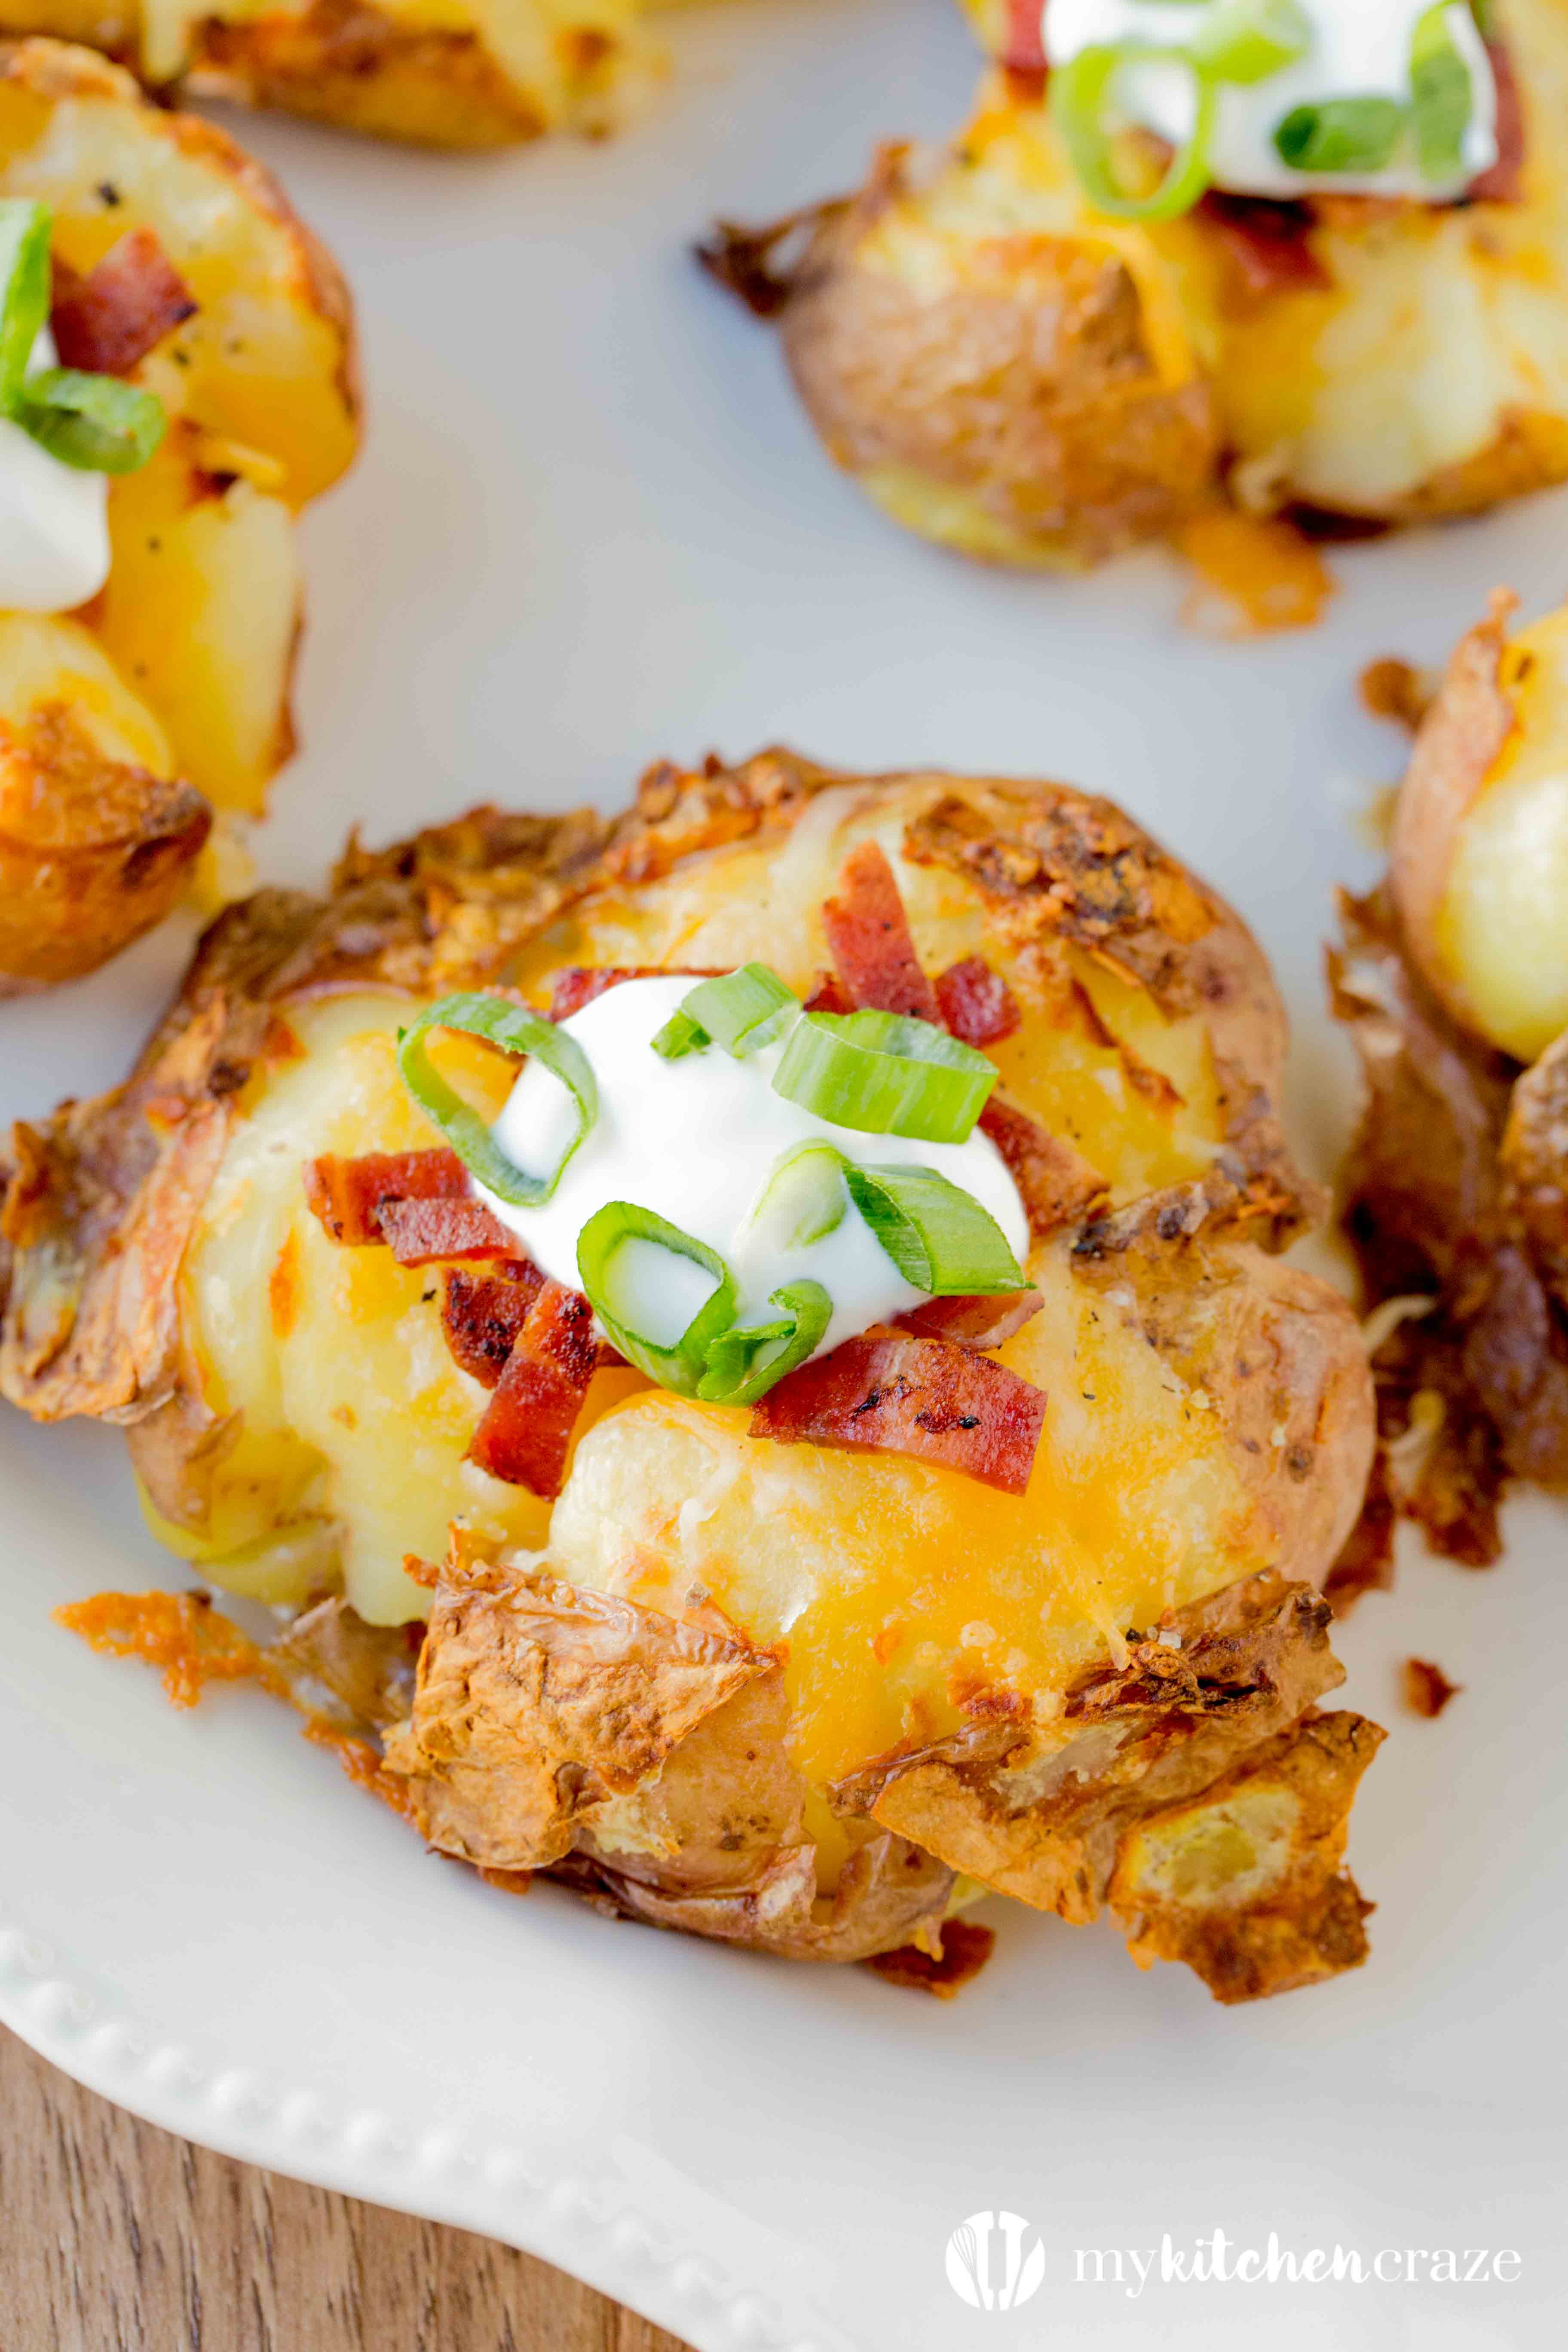 Loaded Smashed Potatoes are a no fuss and delicious side dish. Loaded with all the yummy things you'd find in a loaded baked potato. This is one side everyone will love!